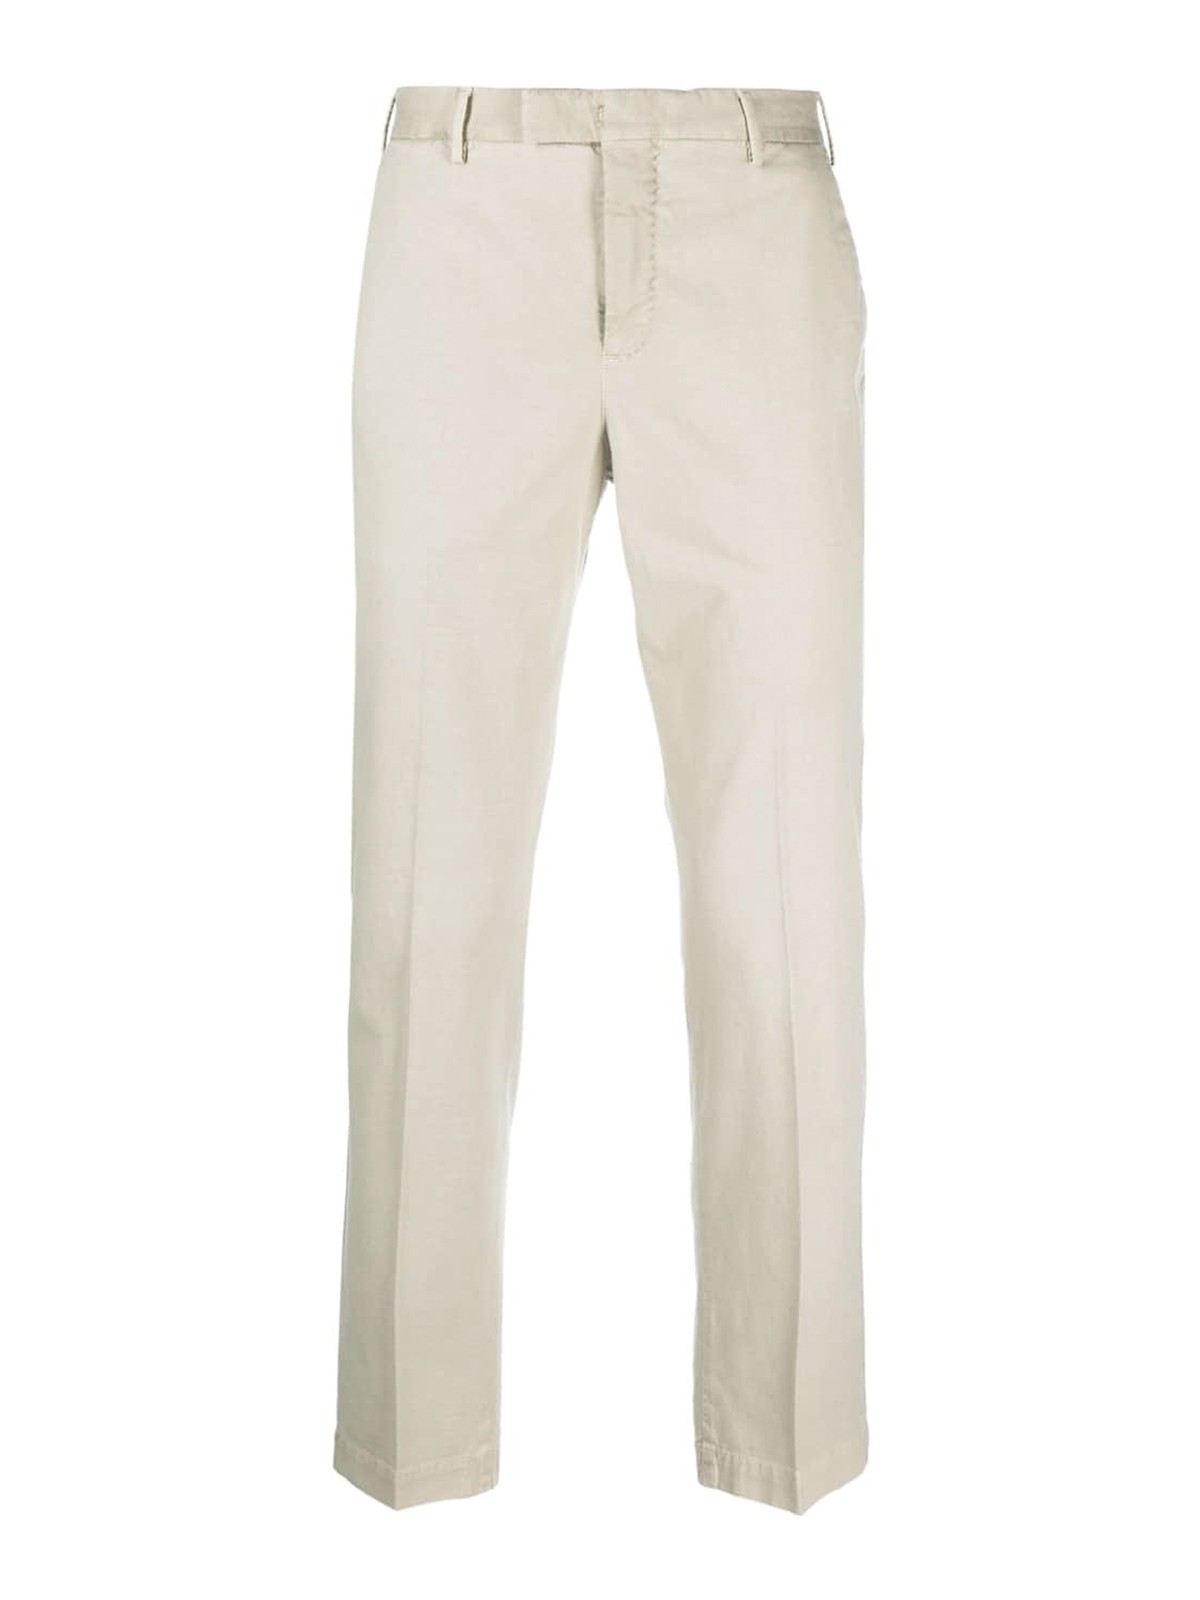 Pt Torino Cropped Tailored Trousers In Beige